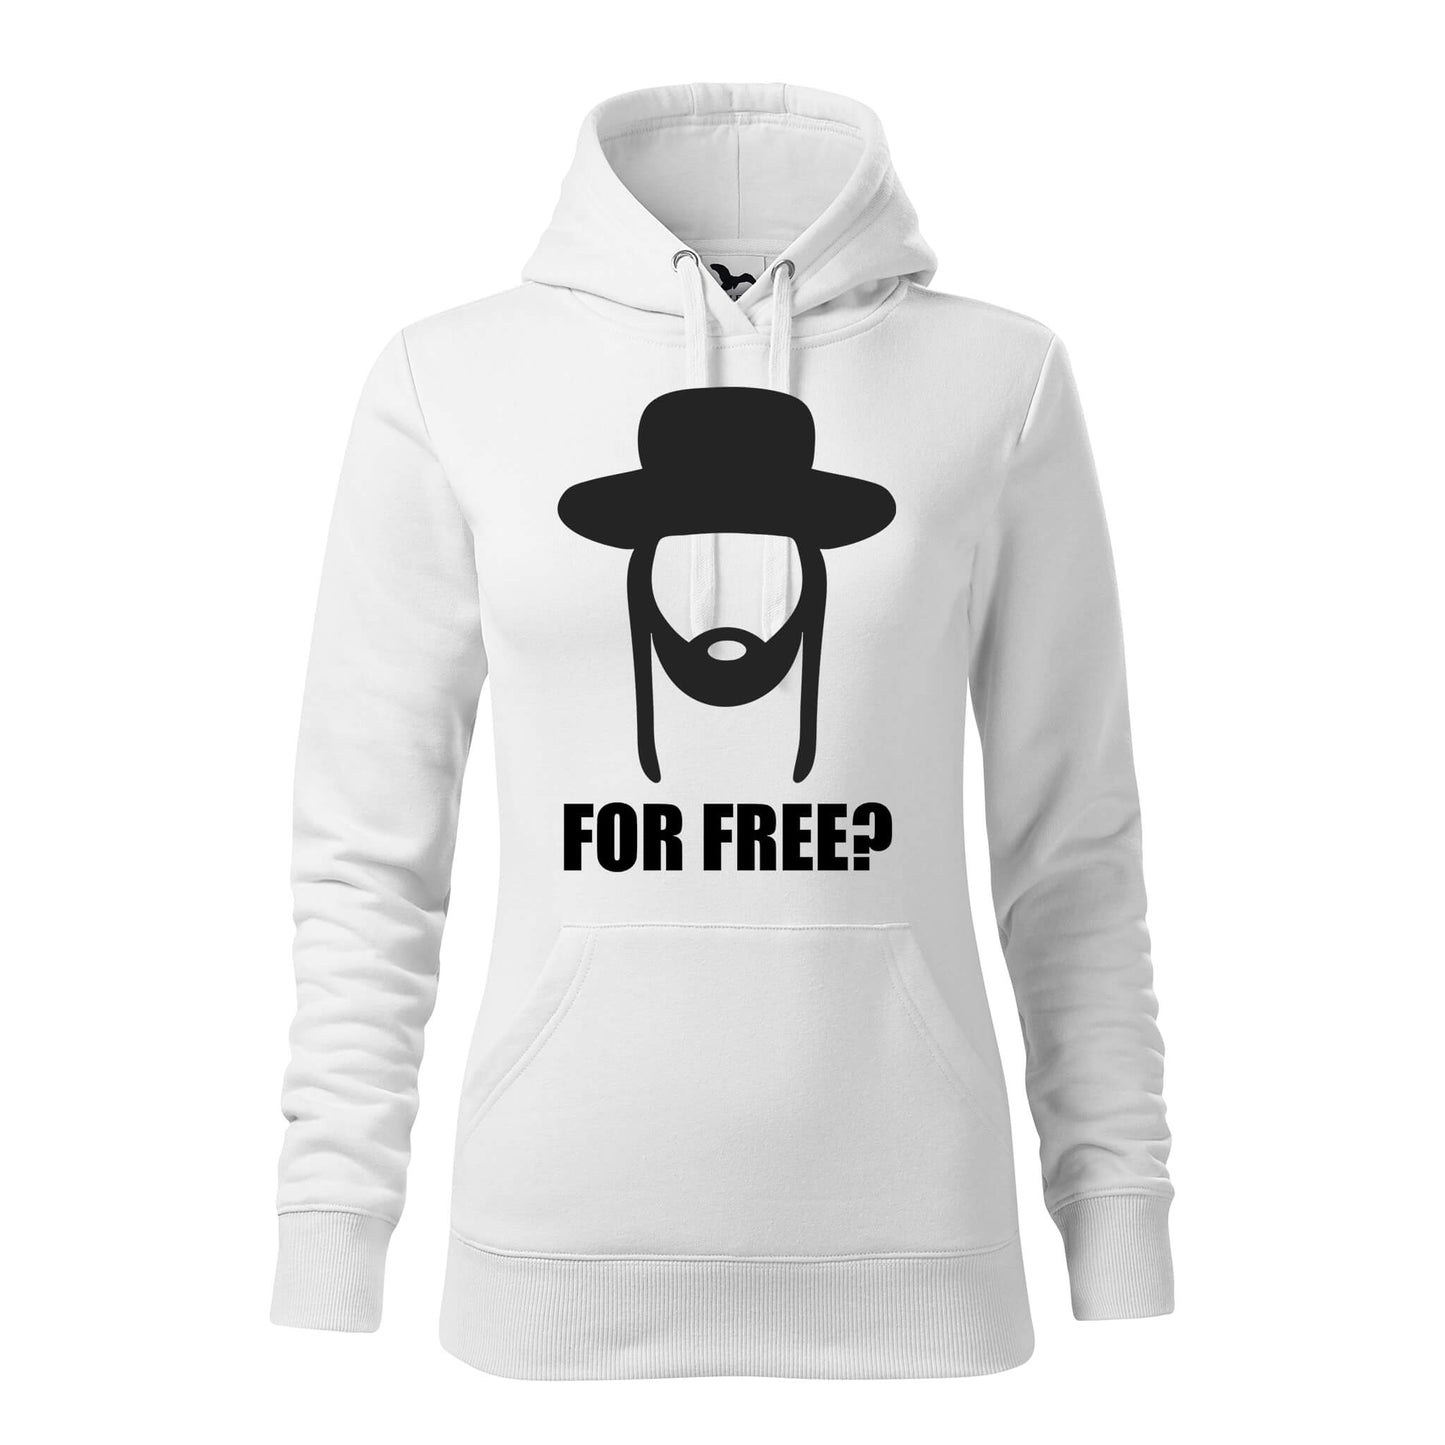 For free hoodie - rvdesignprint